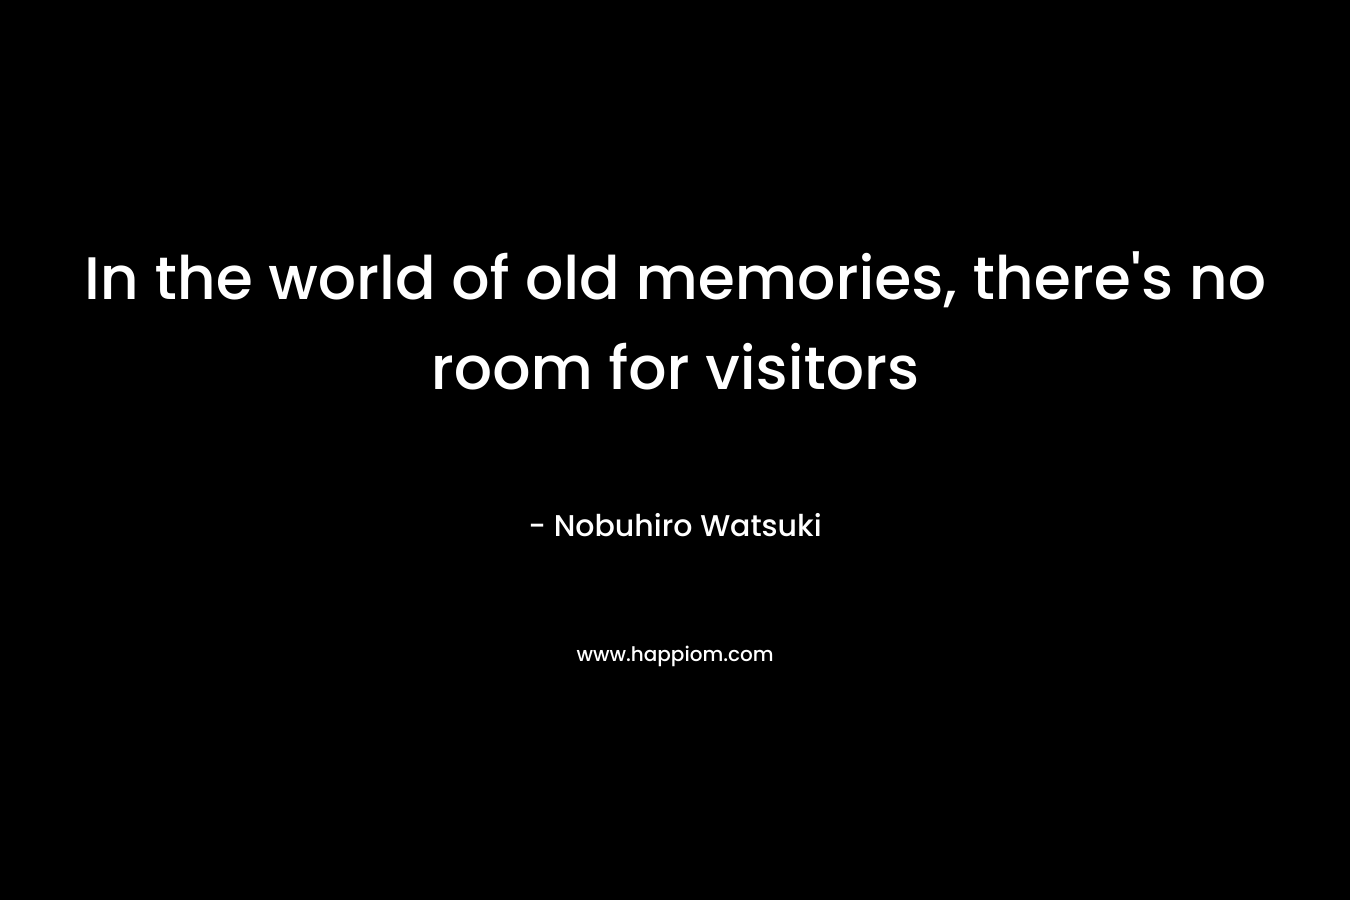 In the world of old memories, there’s no room for visitors – Nobuhiro Watsuki